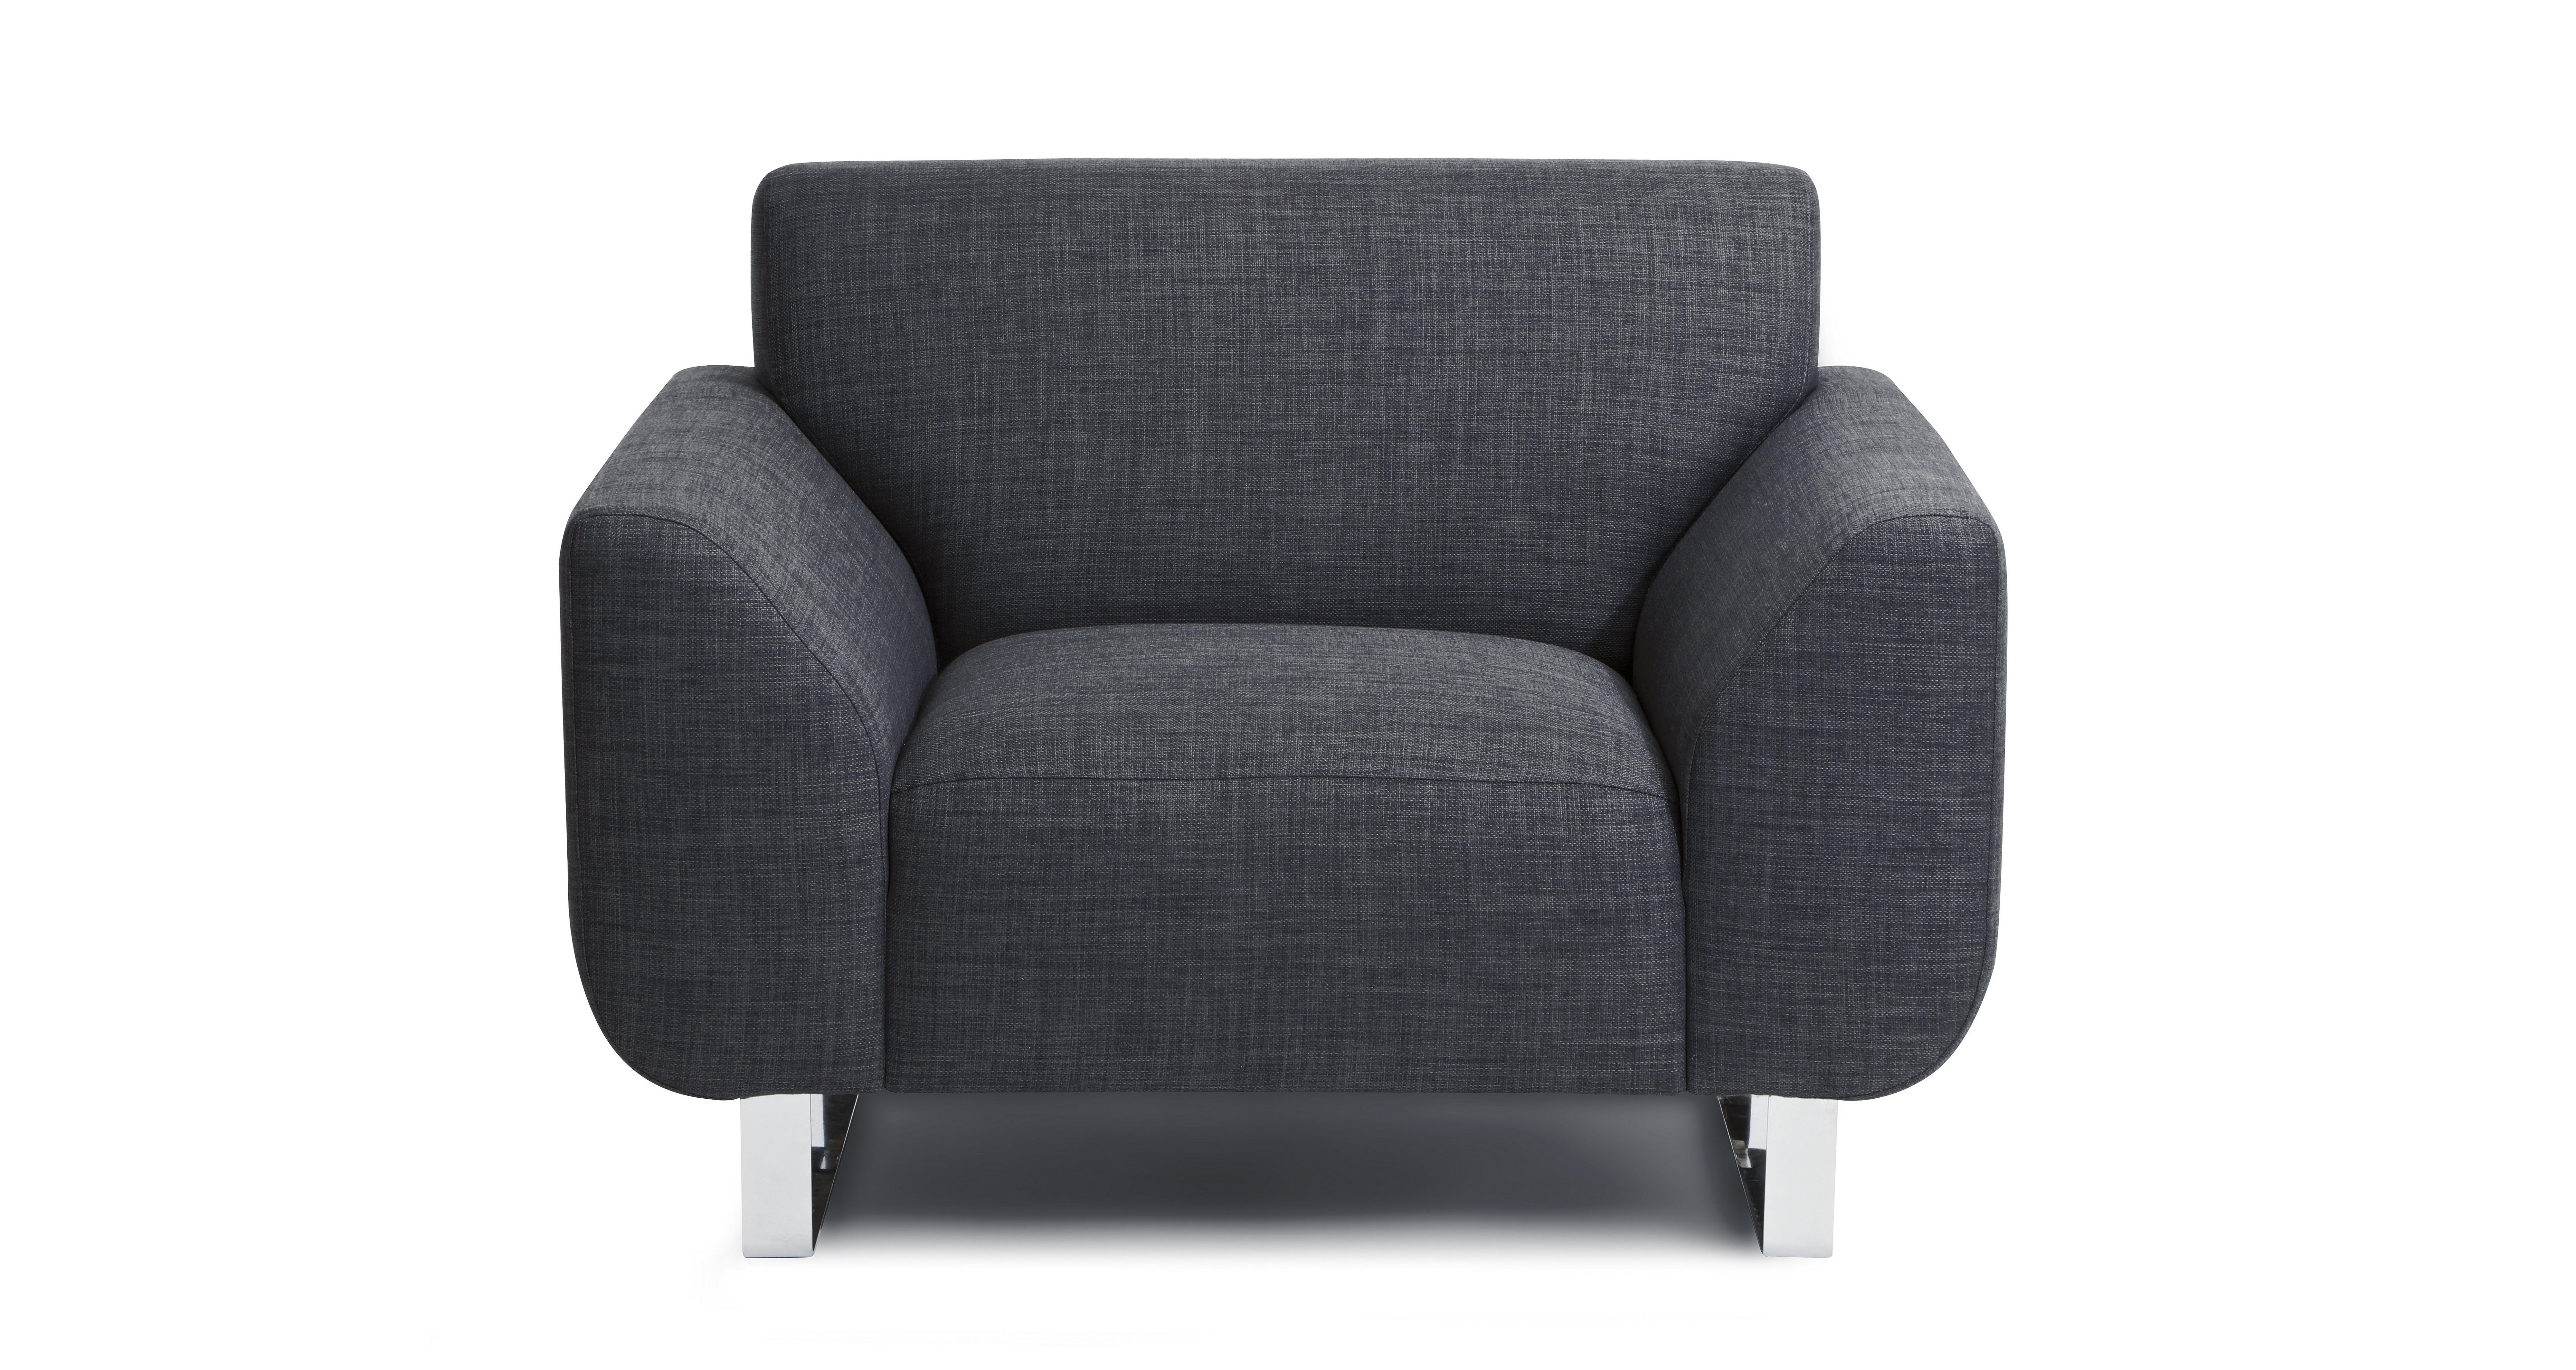 Hardy 3 Seater Sofa (revive fabric) Revive | DFS Ireland